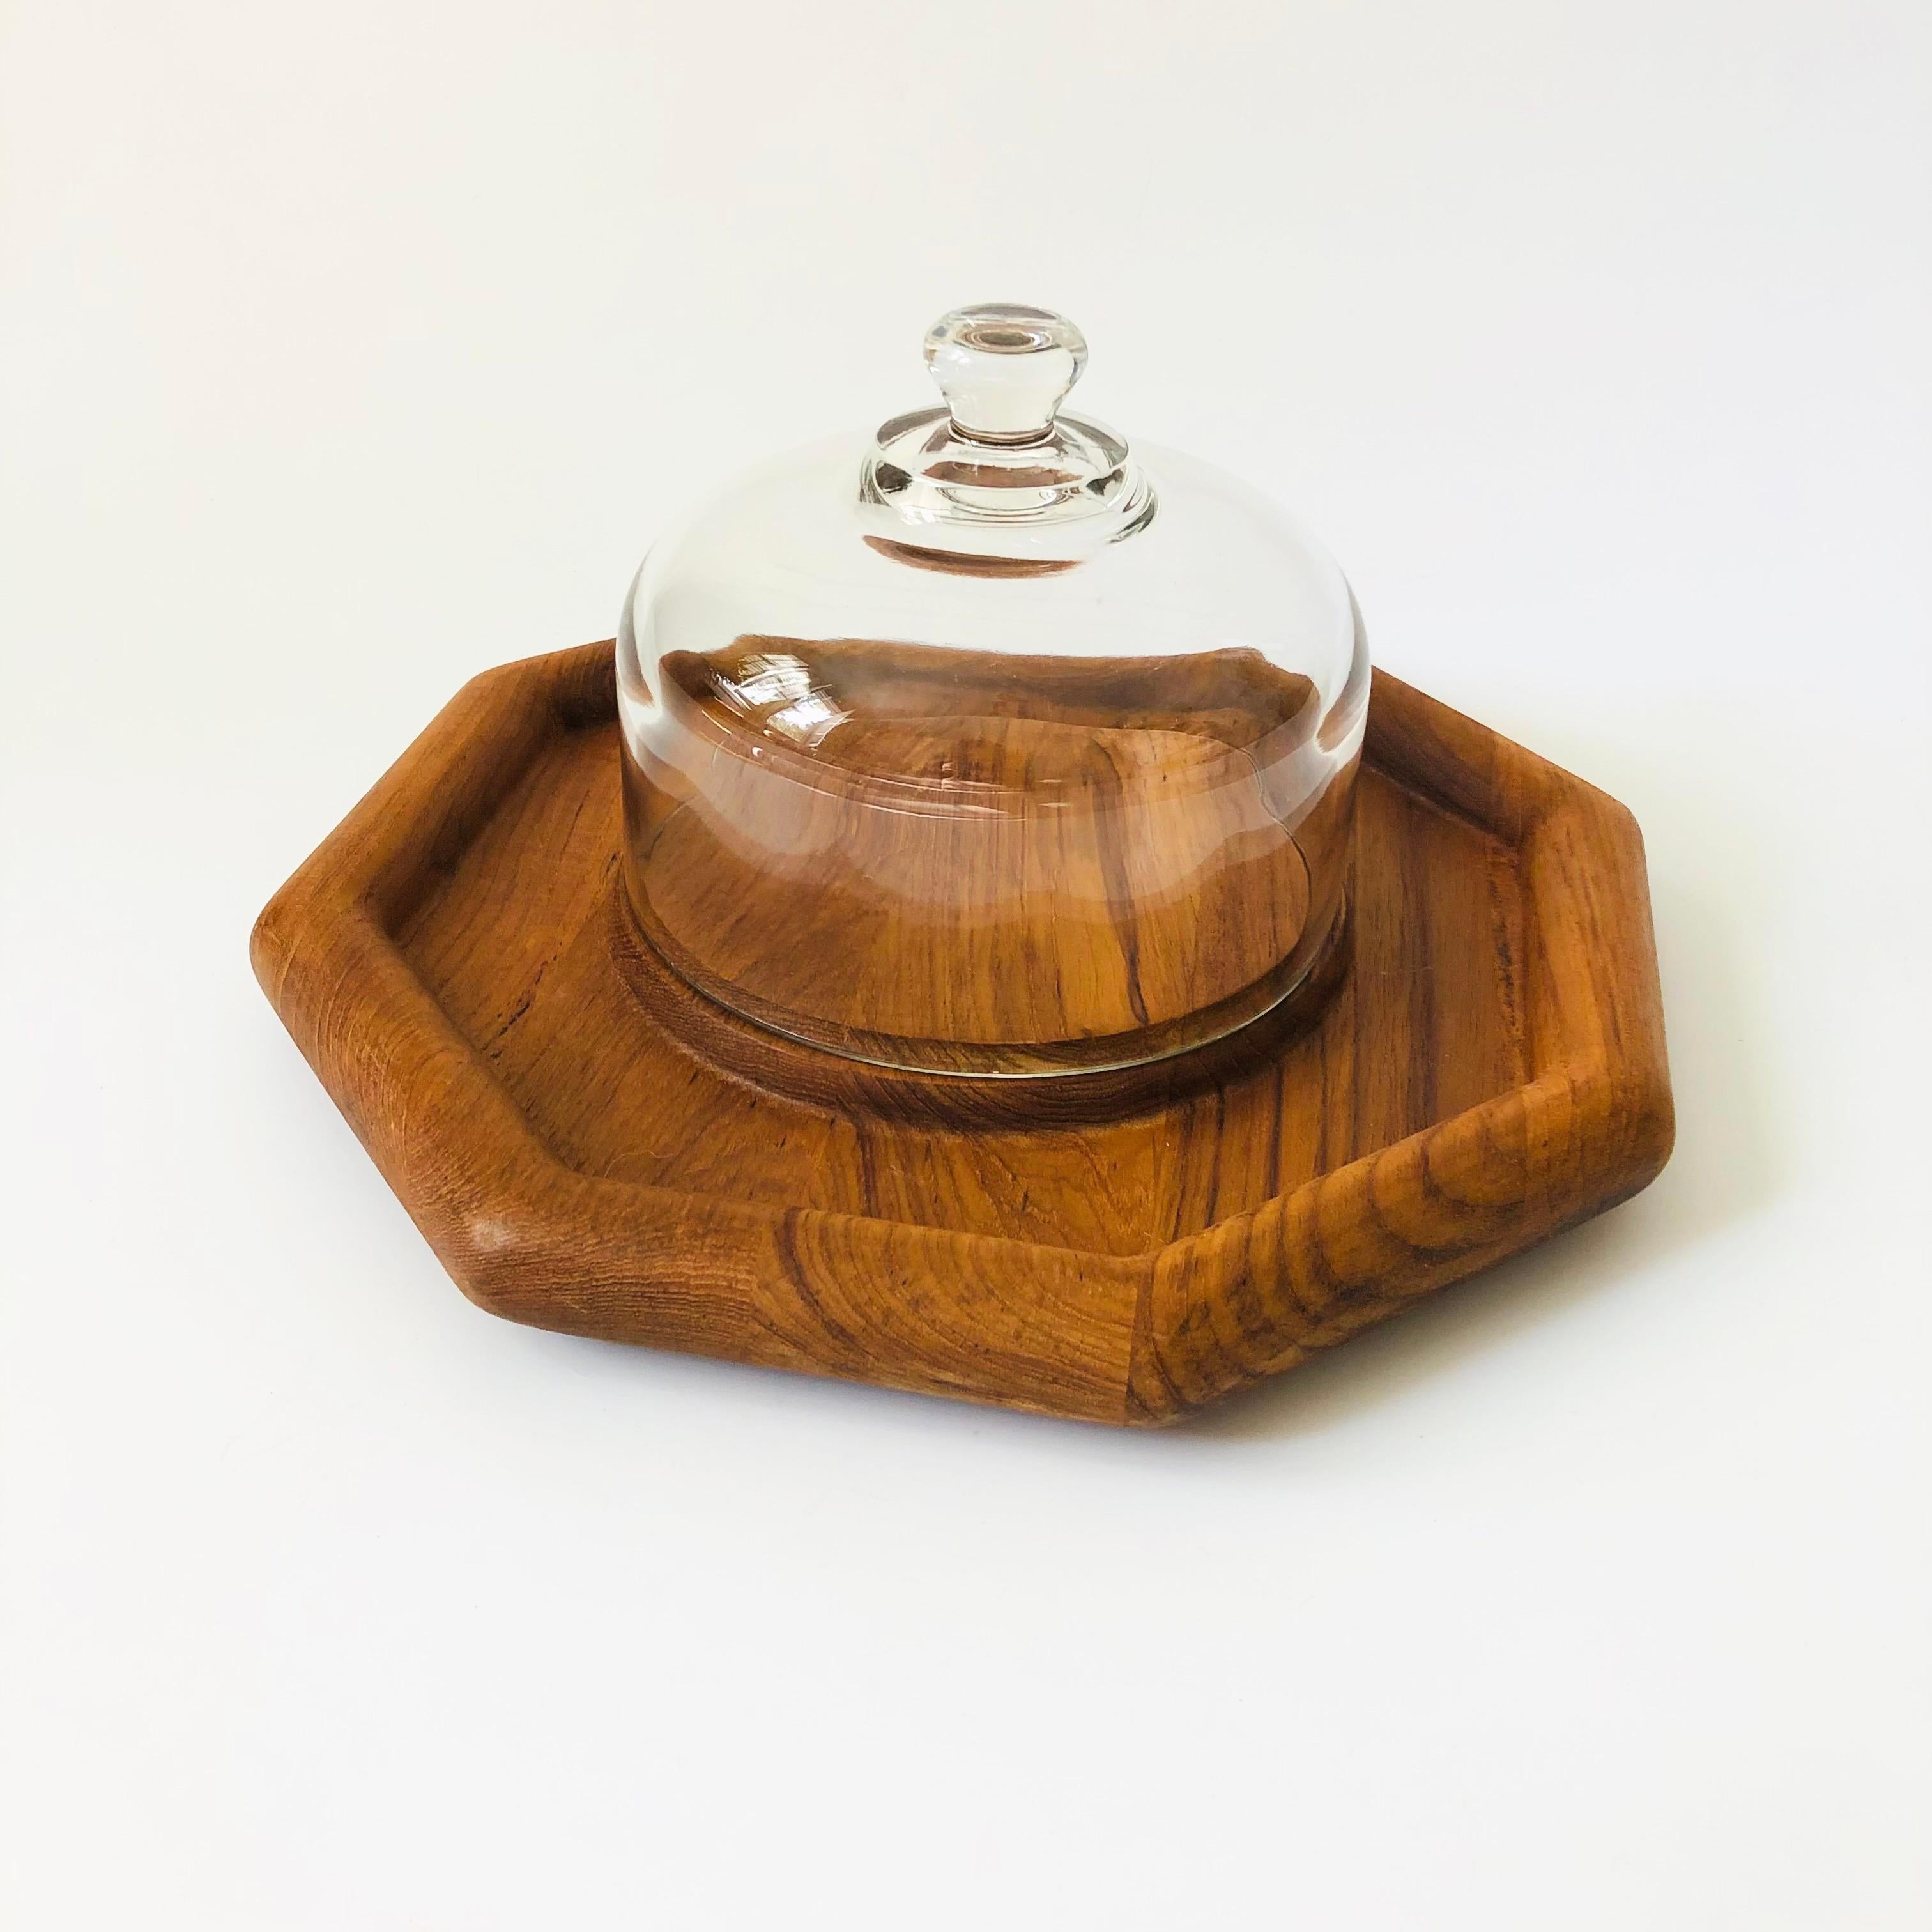 A vintage glass cloche on a teak tray. The top is made of heavy glass with an integrally formed handle sitting on an octagonal teak tray.  A useful serving piece perfect for serving appetizers or cheeses.

